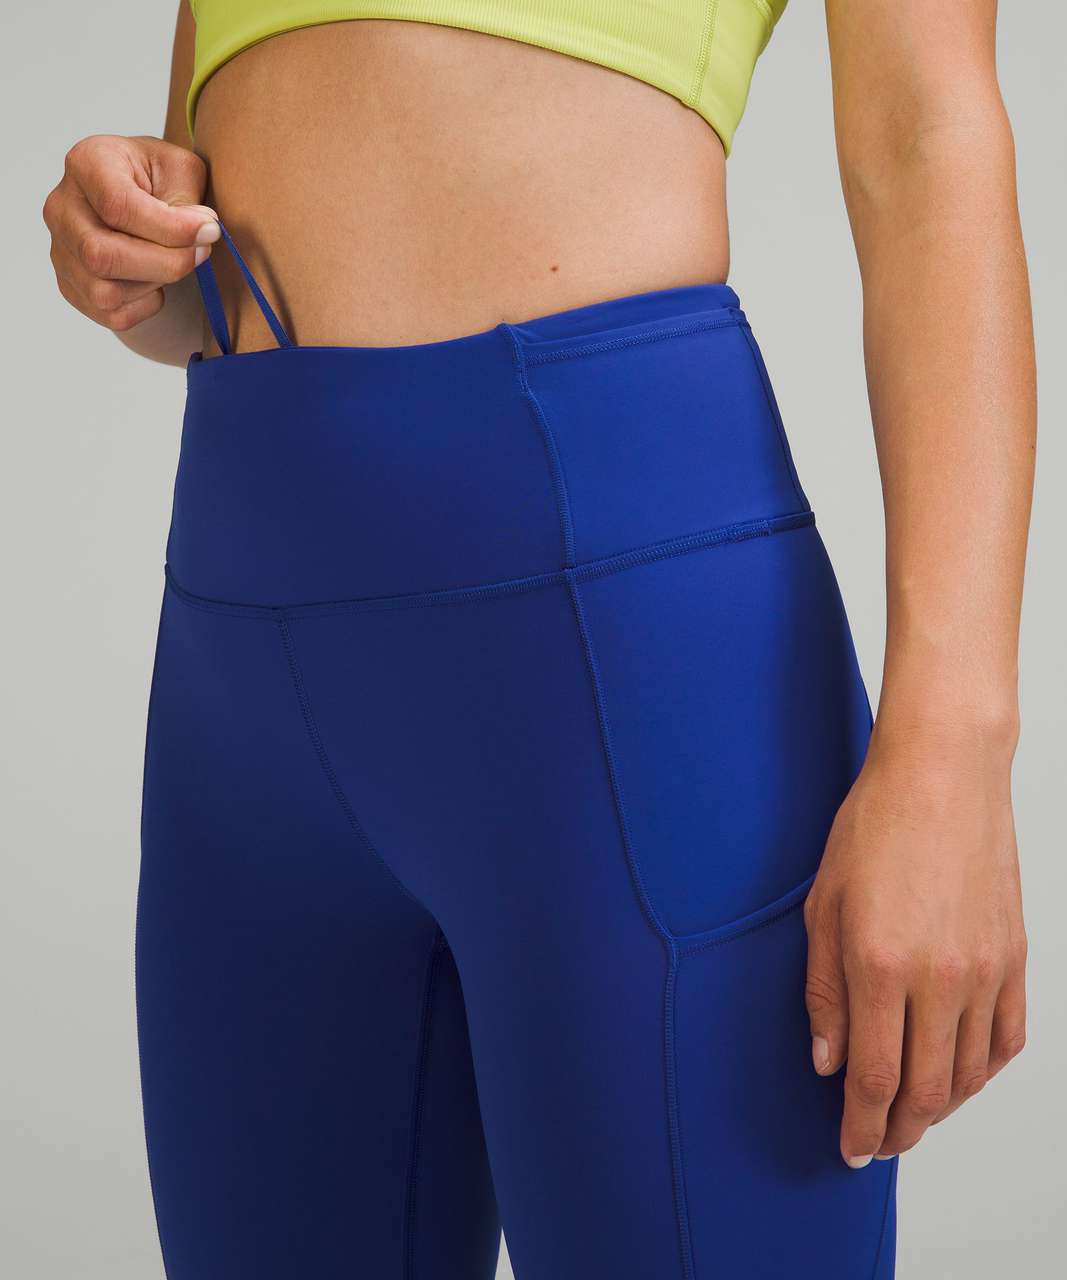 Lululemon Fast and Free High-Rise Crop 19" - Psychic